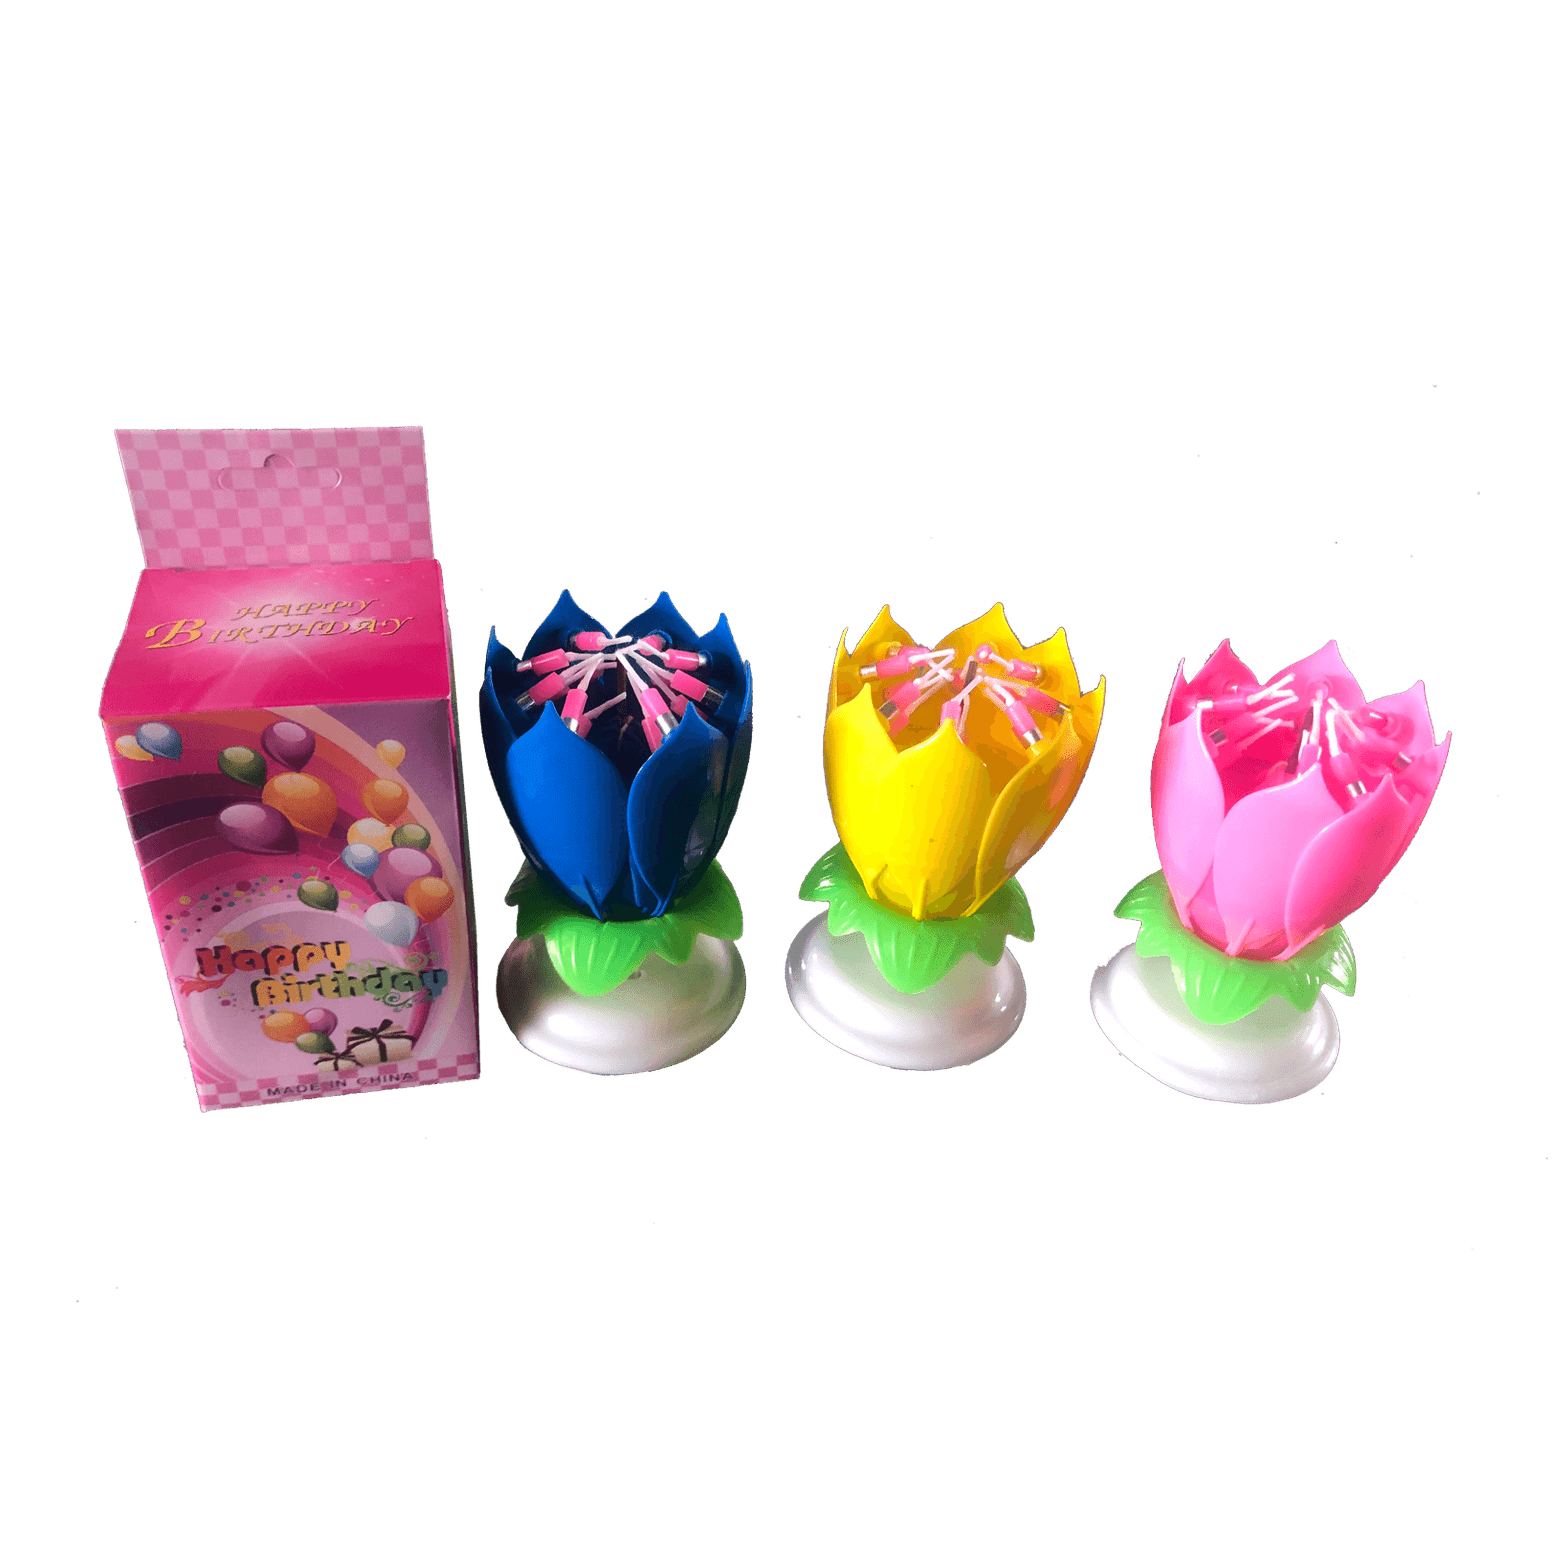 1pc Musical Flower Birthday Candle Sparkler - Assorted colors